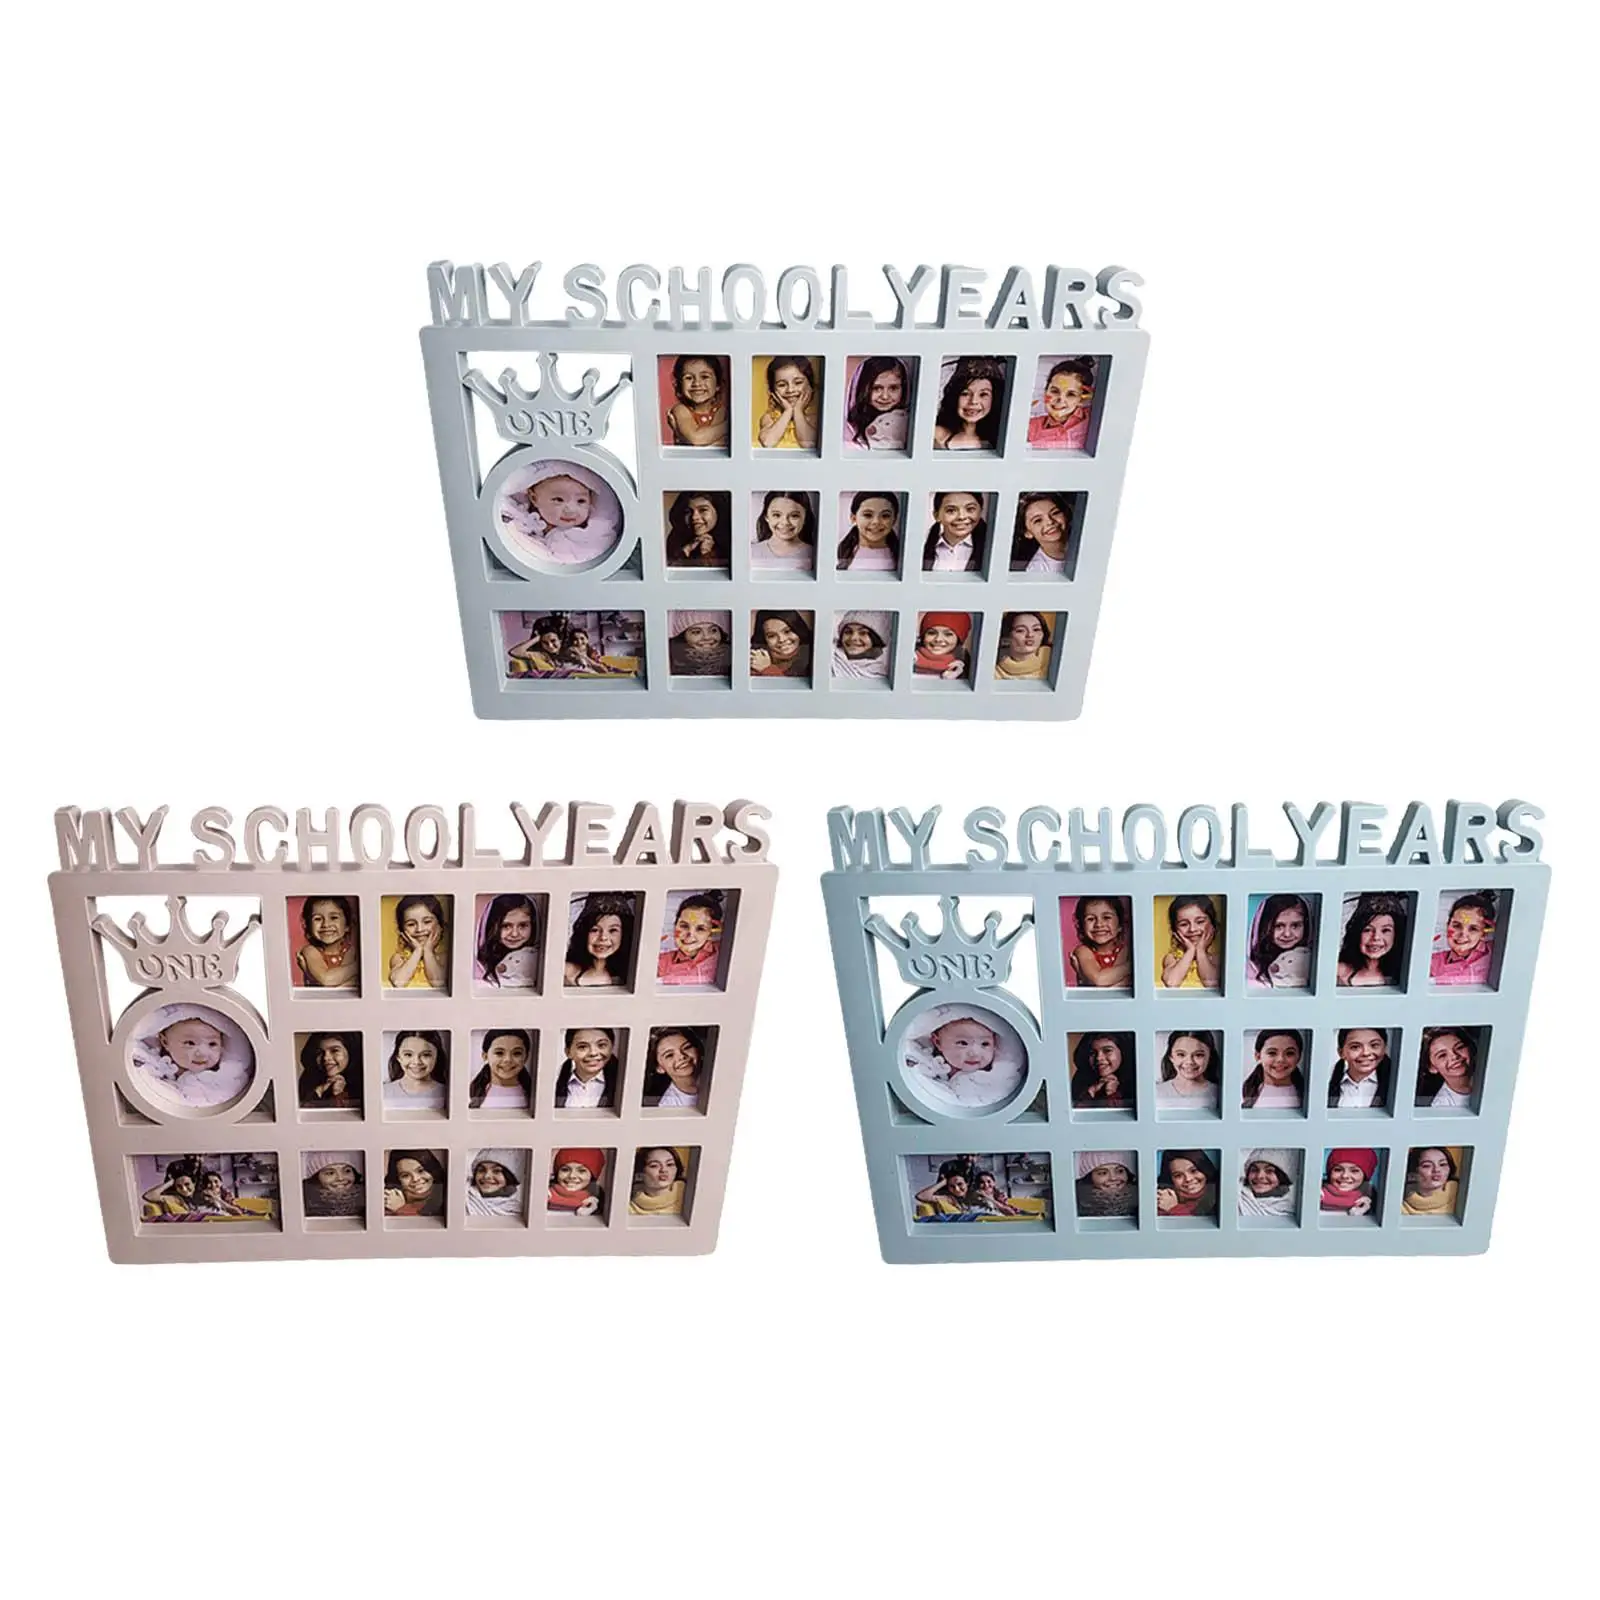 Novelty School Days Graduation Frame School Years Photo Collage Student Keepsake Picture Frame Kids Picture Frame for Students